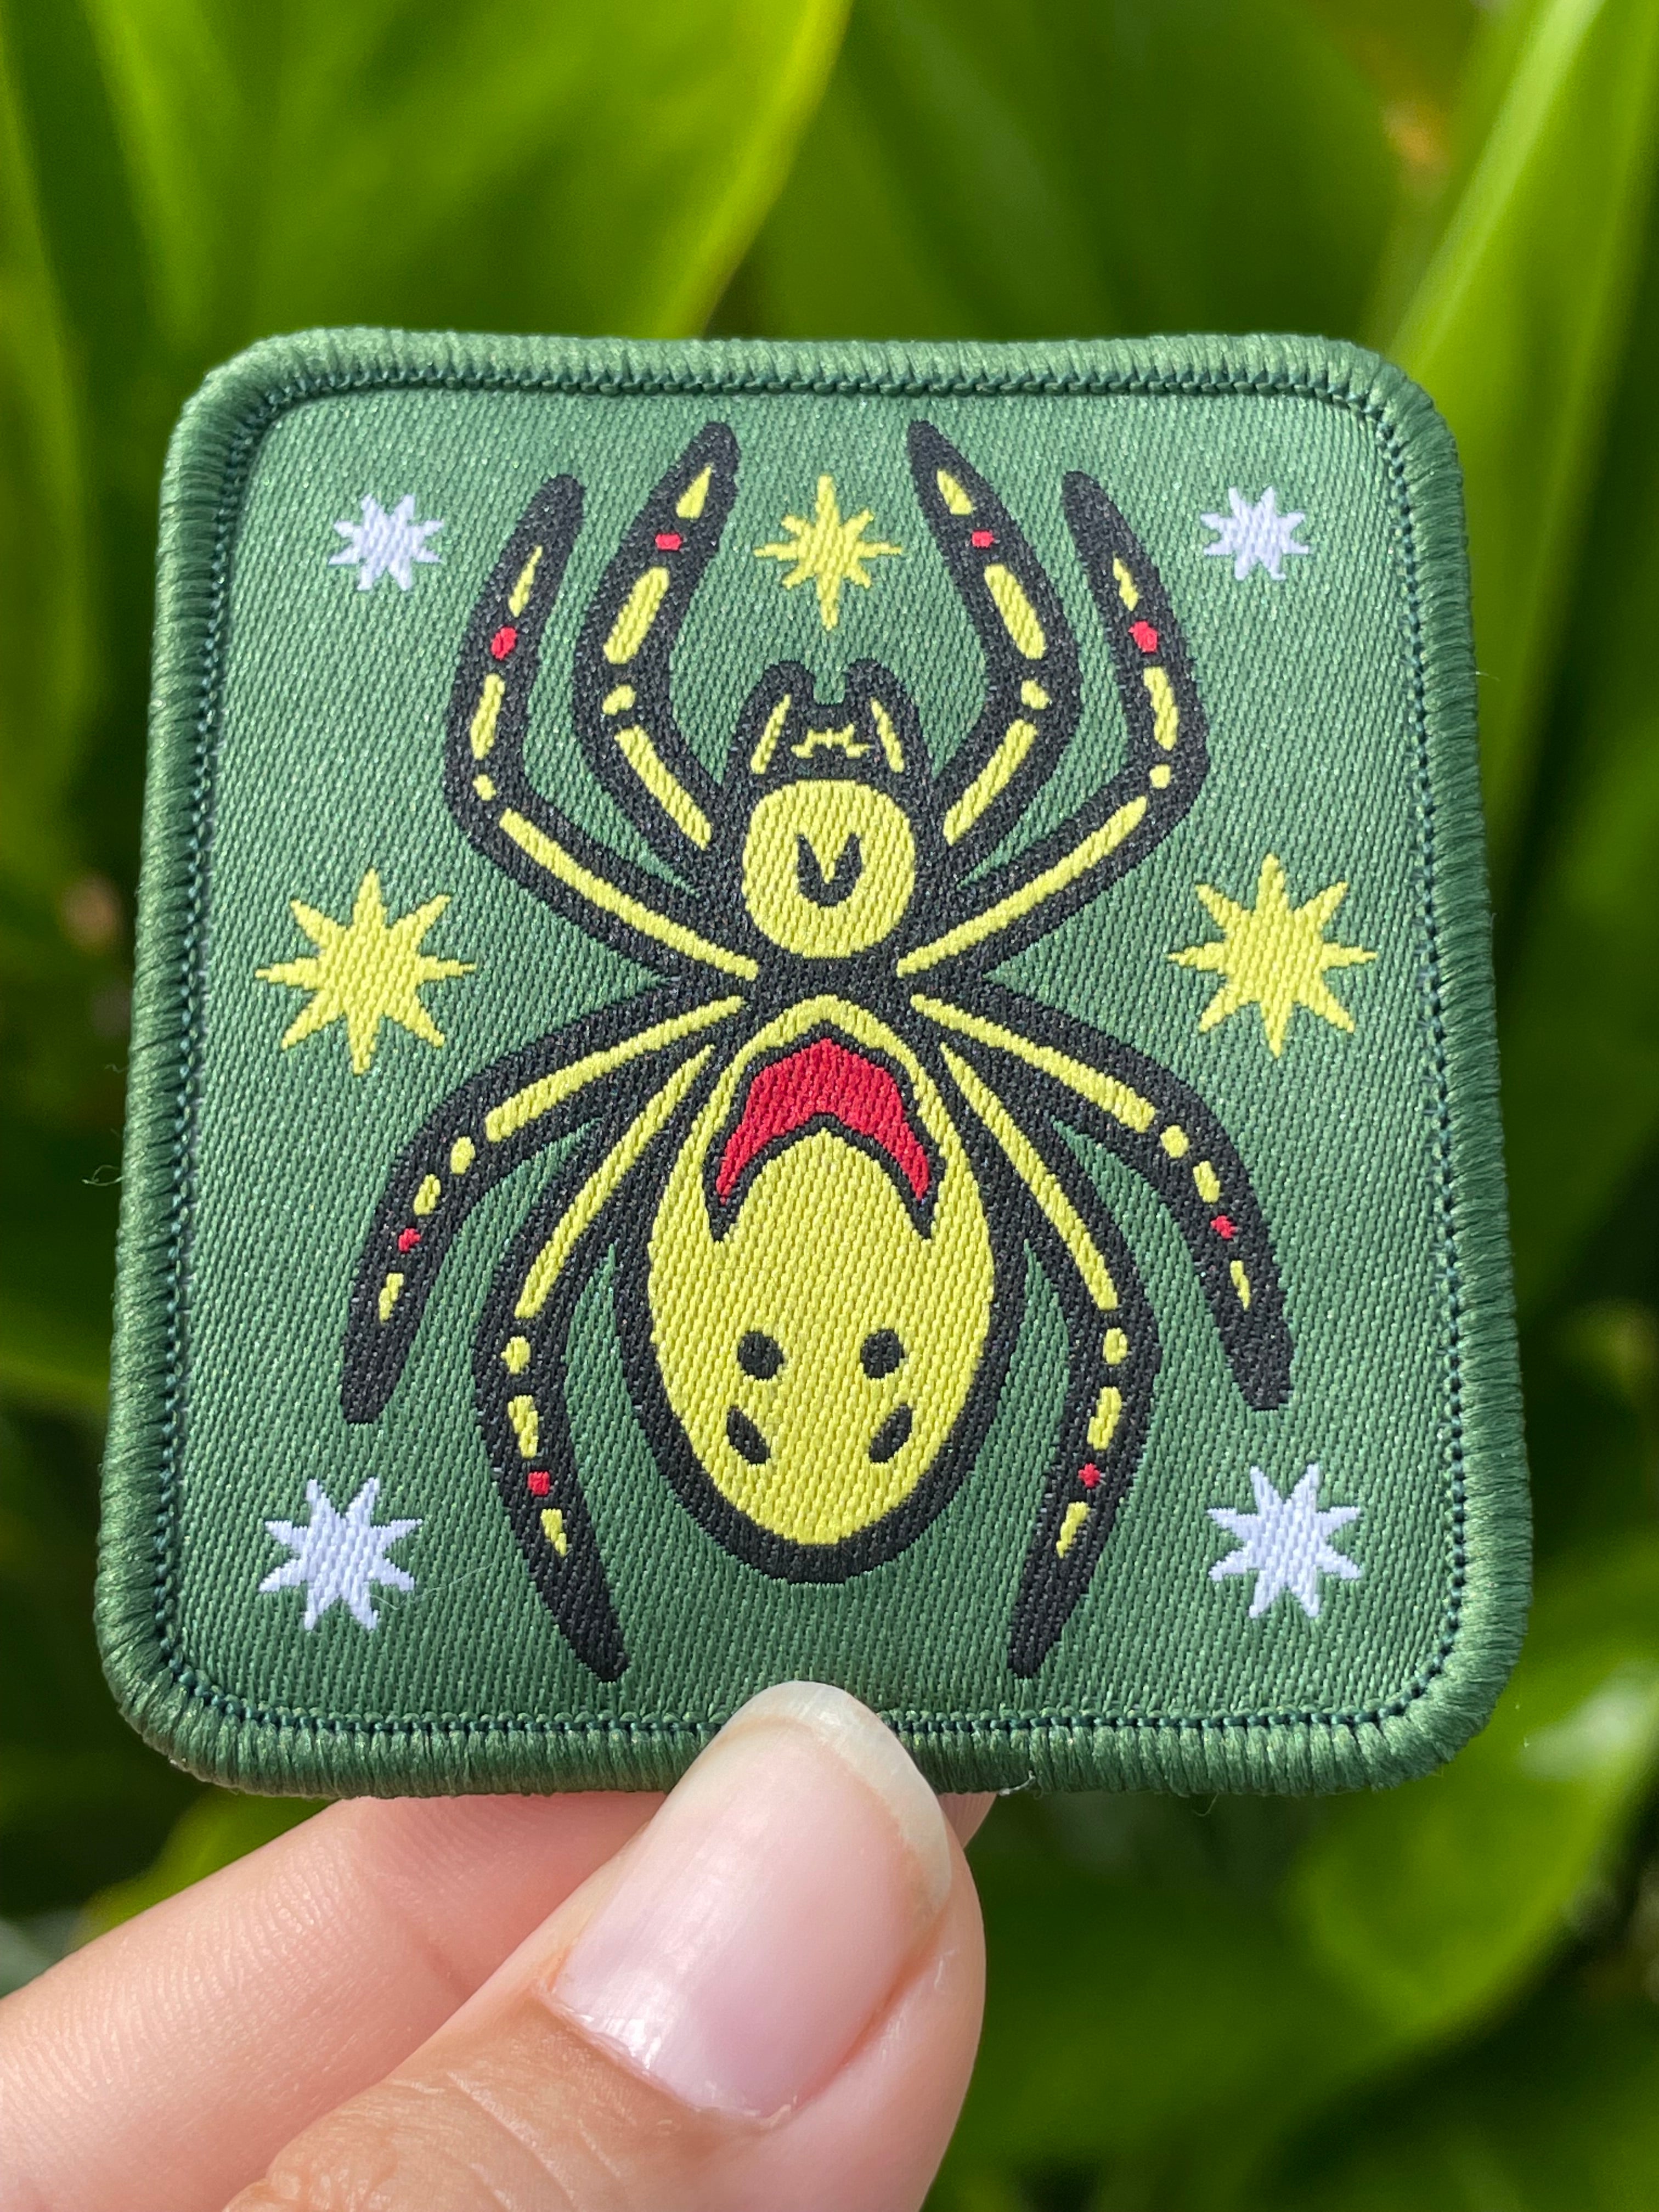 Spider-Man - Patch - Back Patches - Patch Keychains Stickers